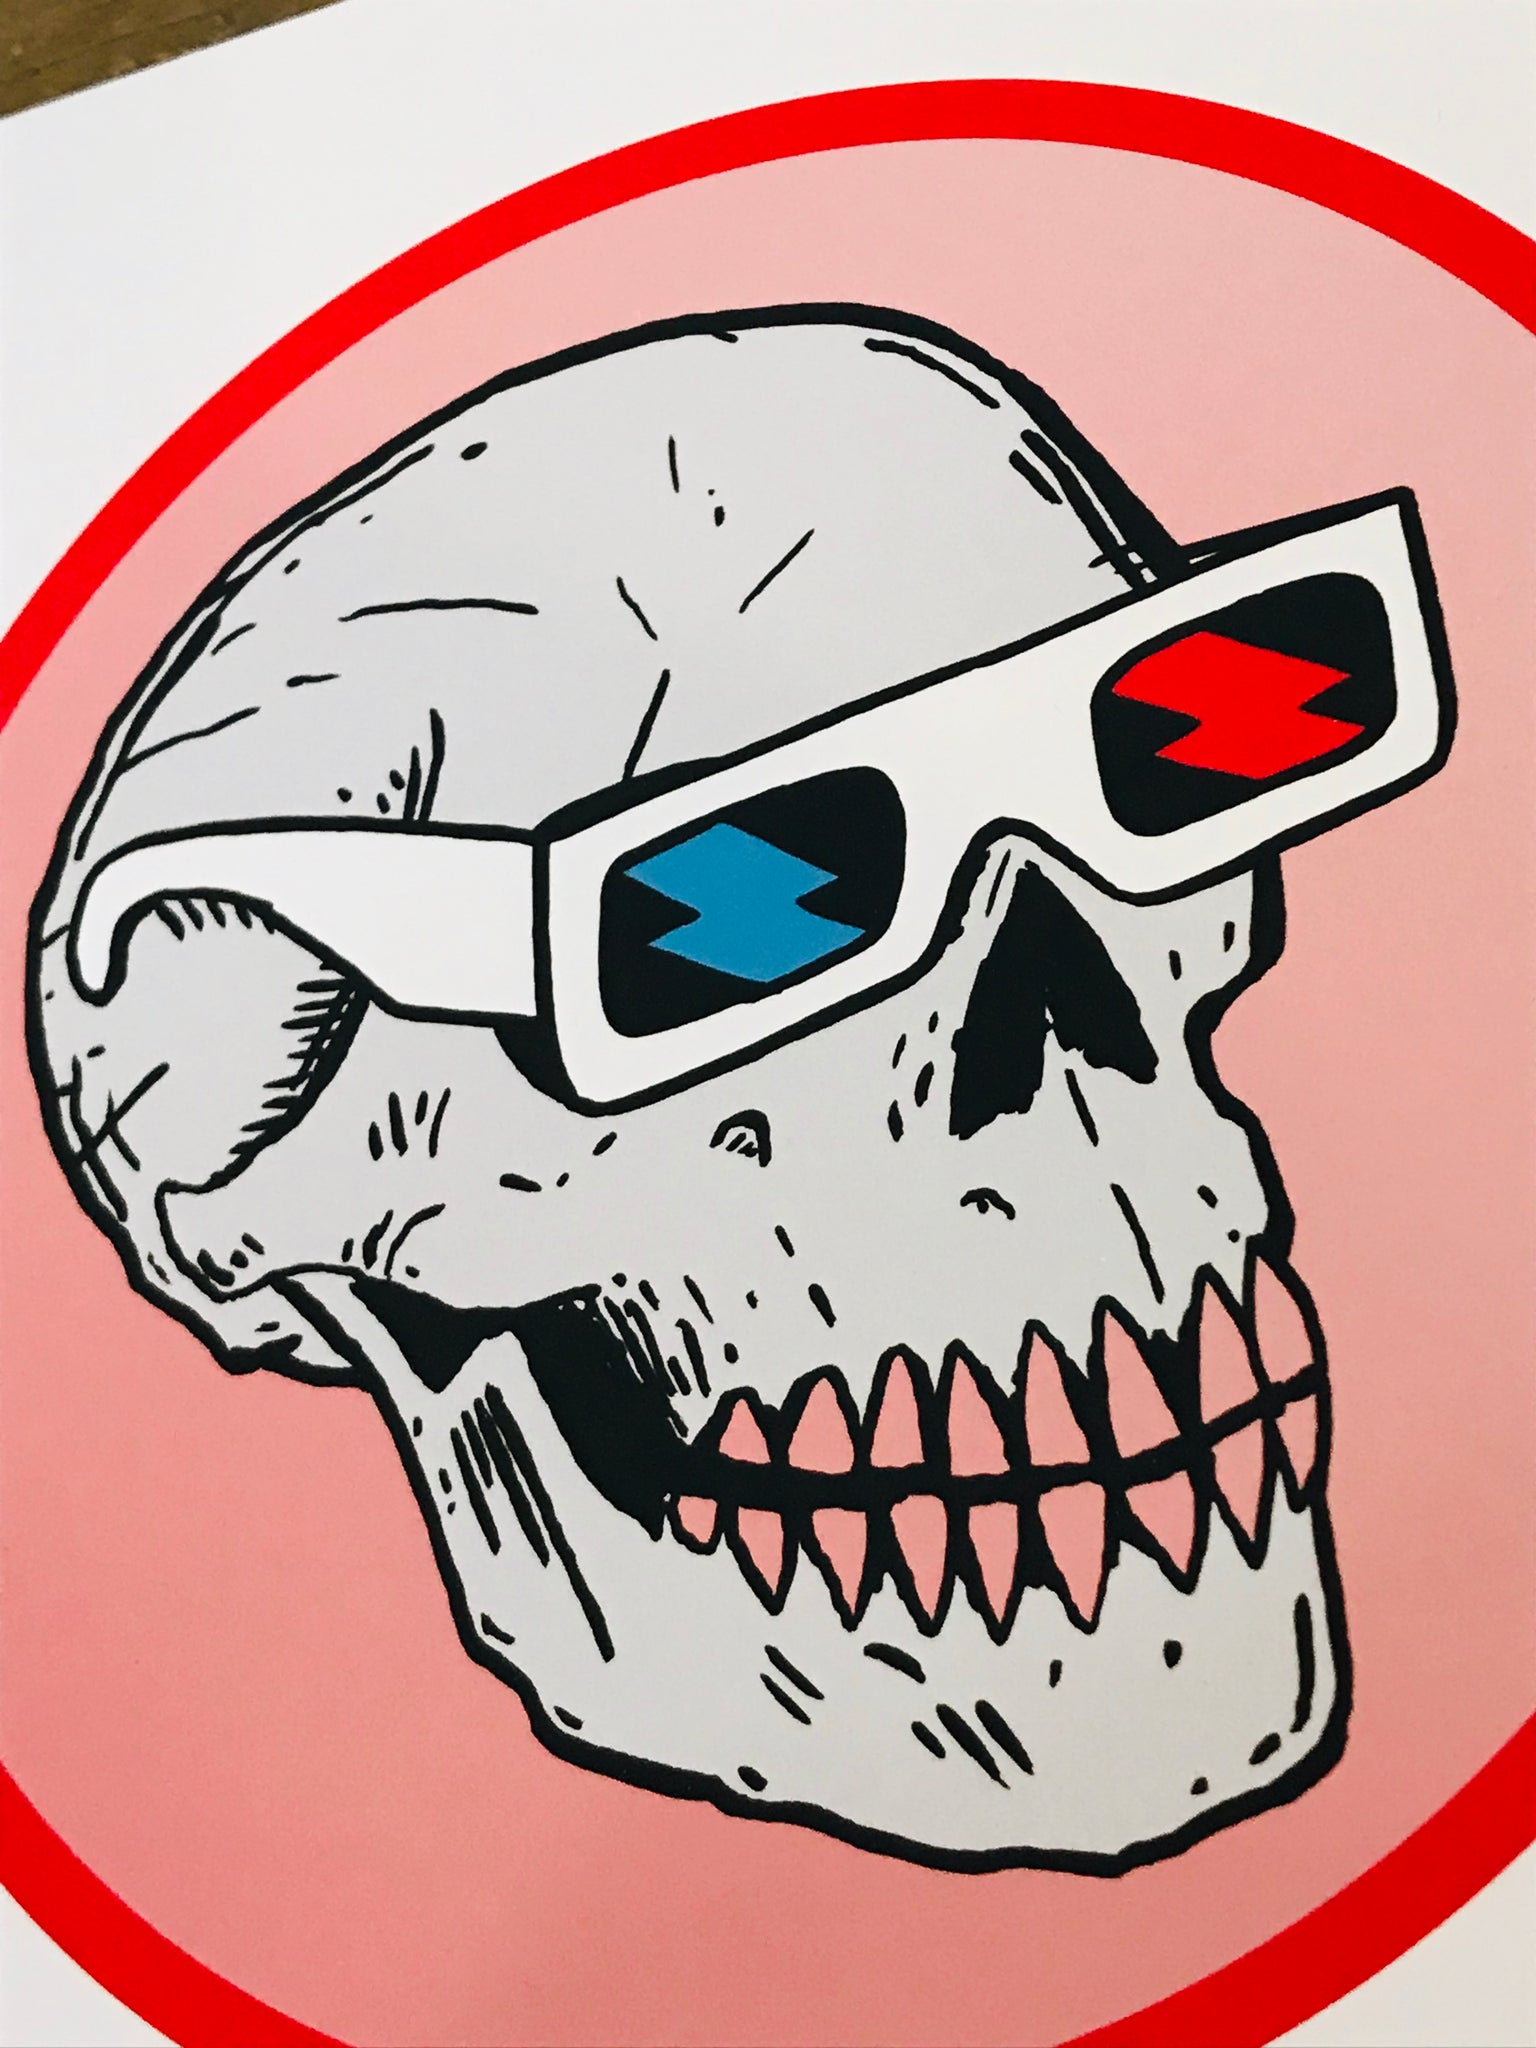 Skull with 3D Glasses 8” by 8” Giclee Print by Kris Johnsen